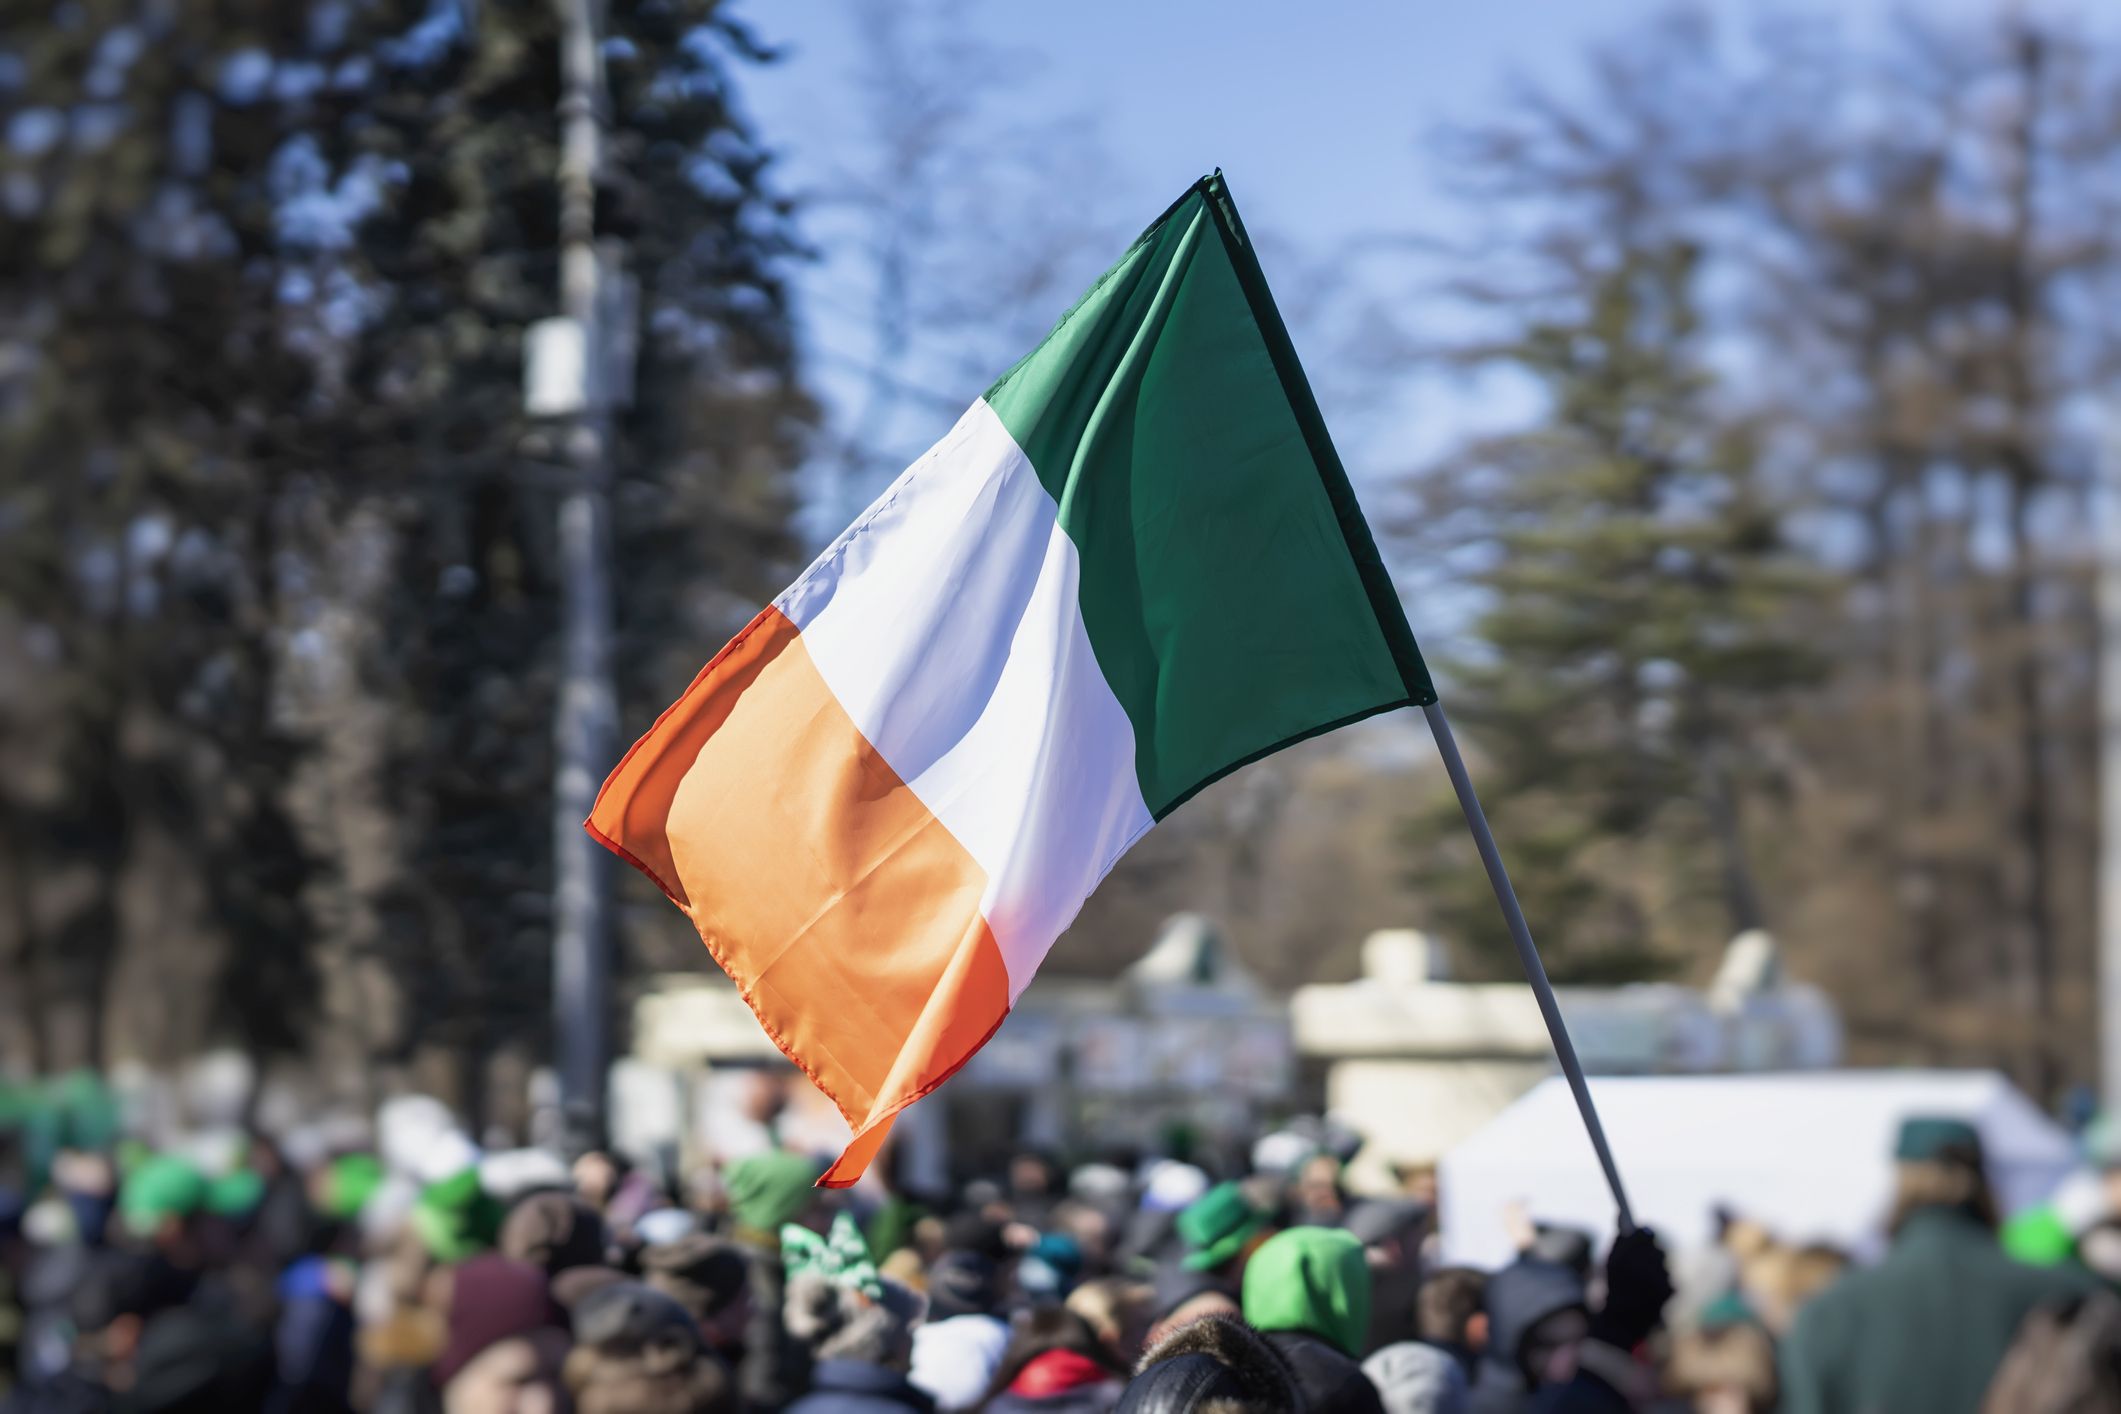 7 Popular St. Patrick's Day Traditions - St. Patrick's Day Symbols and  Meanings